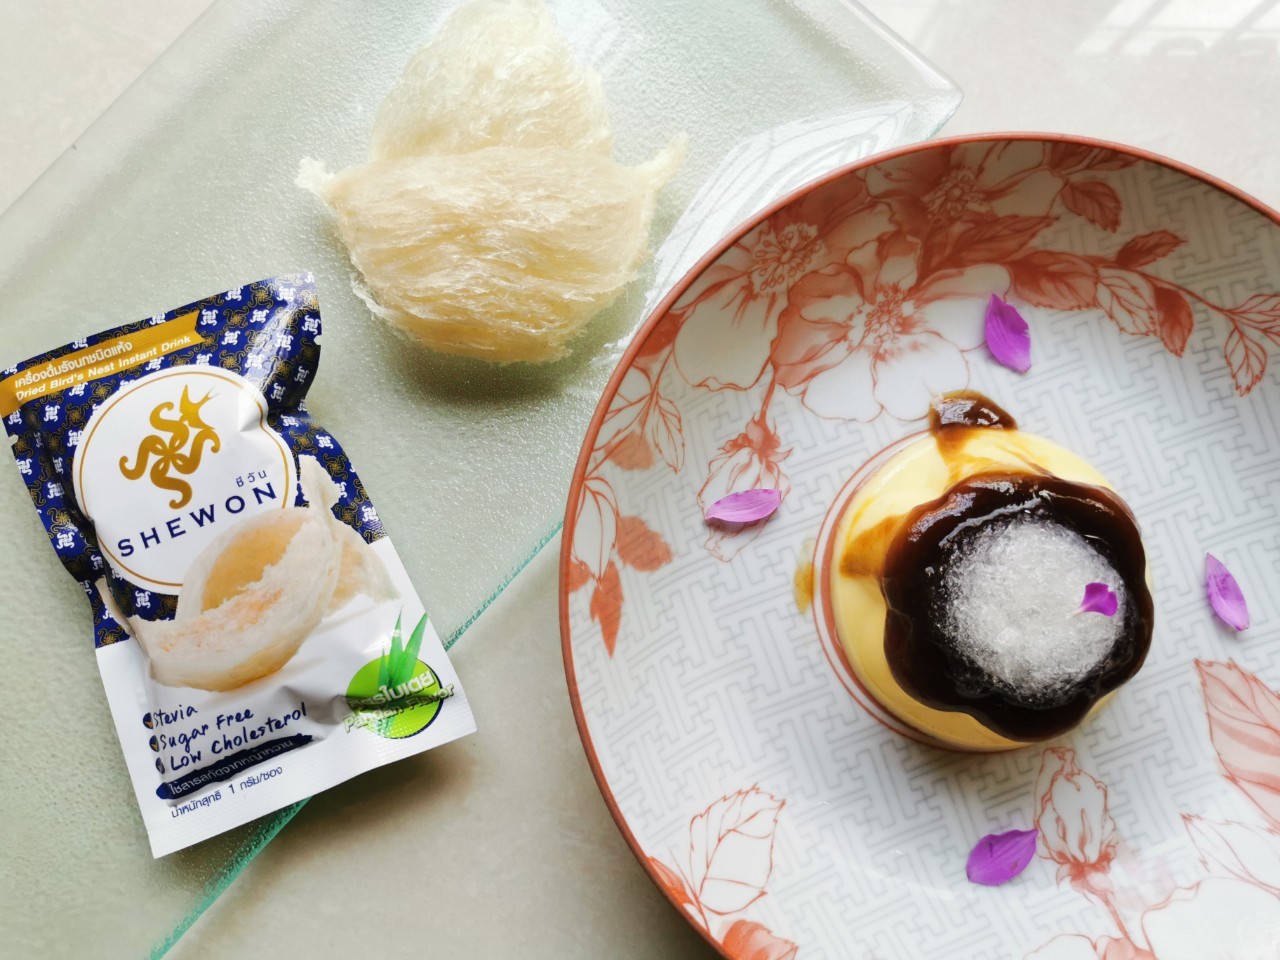 SHEWON Menu “Instant Bird’s Nest with Passion Fruit Jelly and Berry”